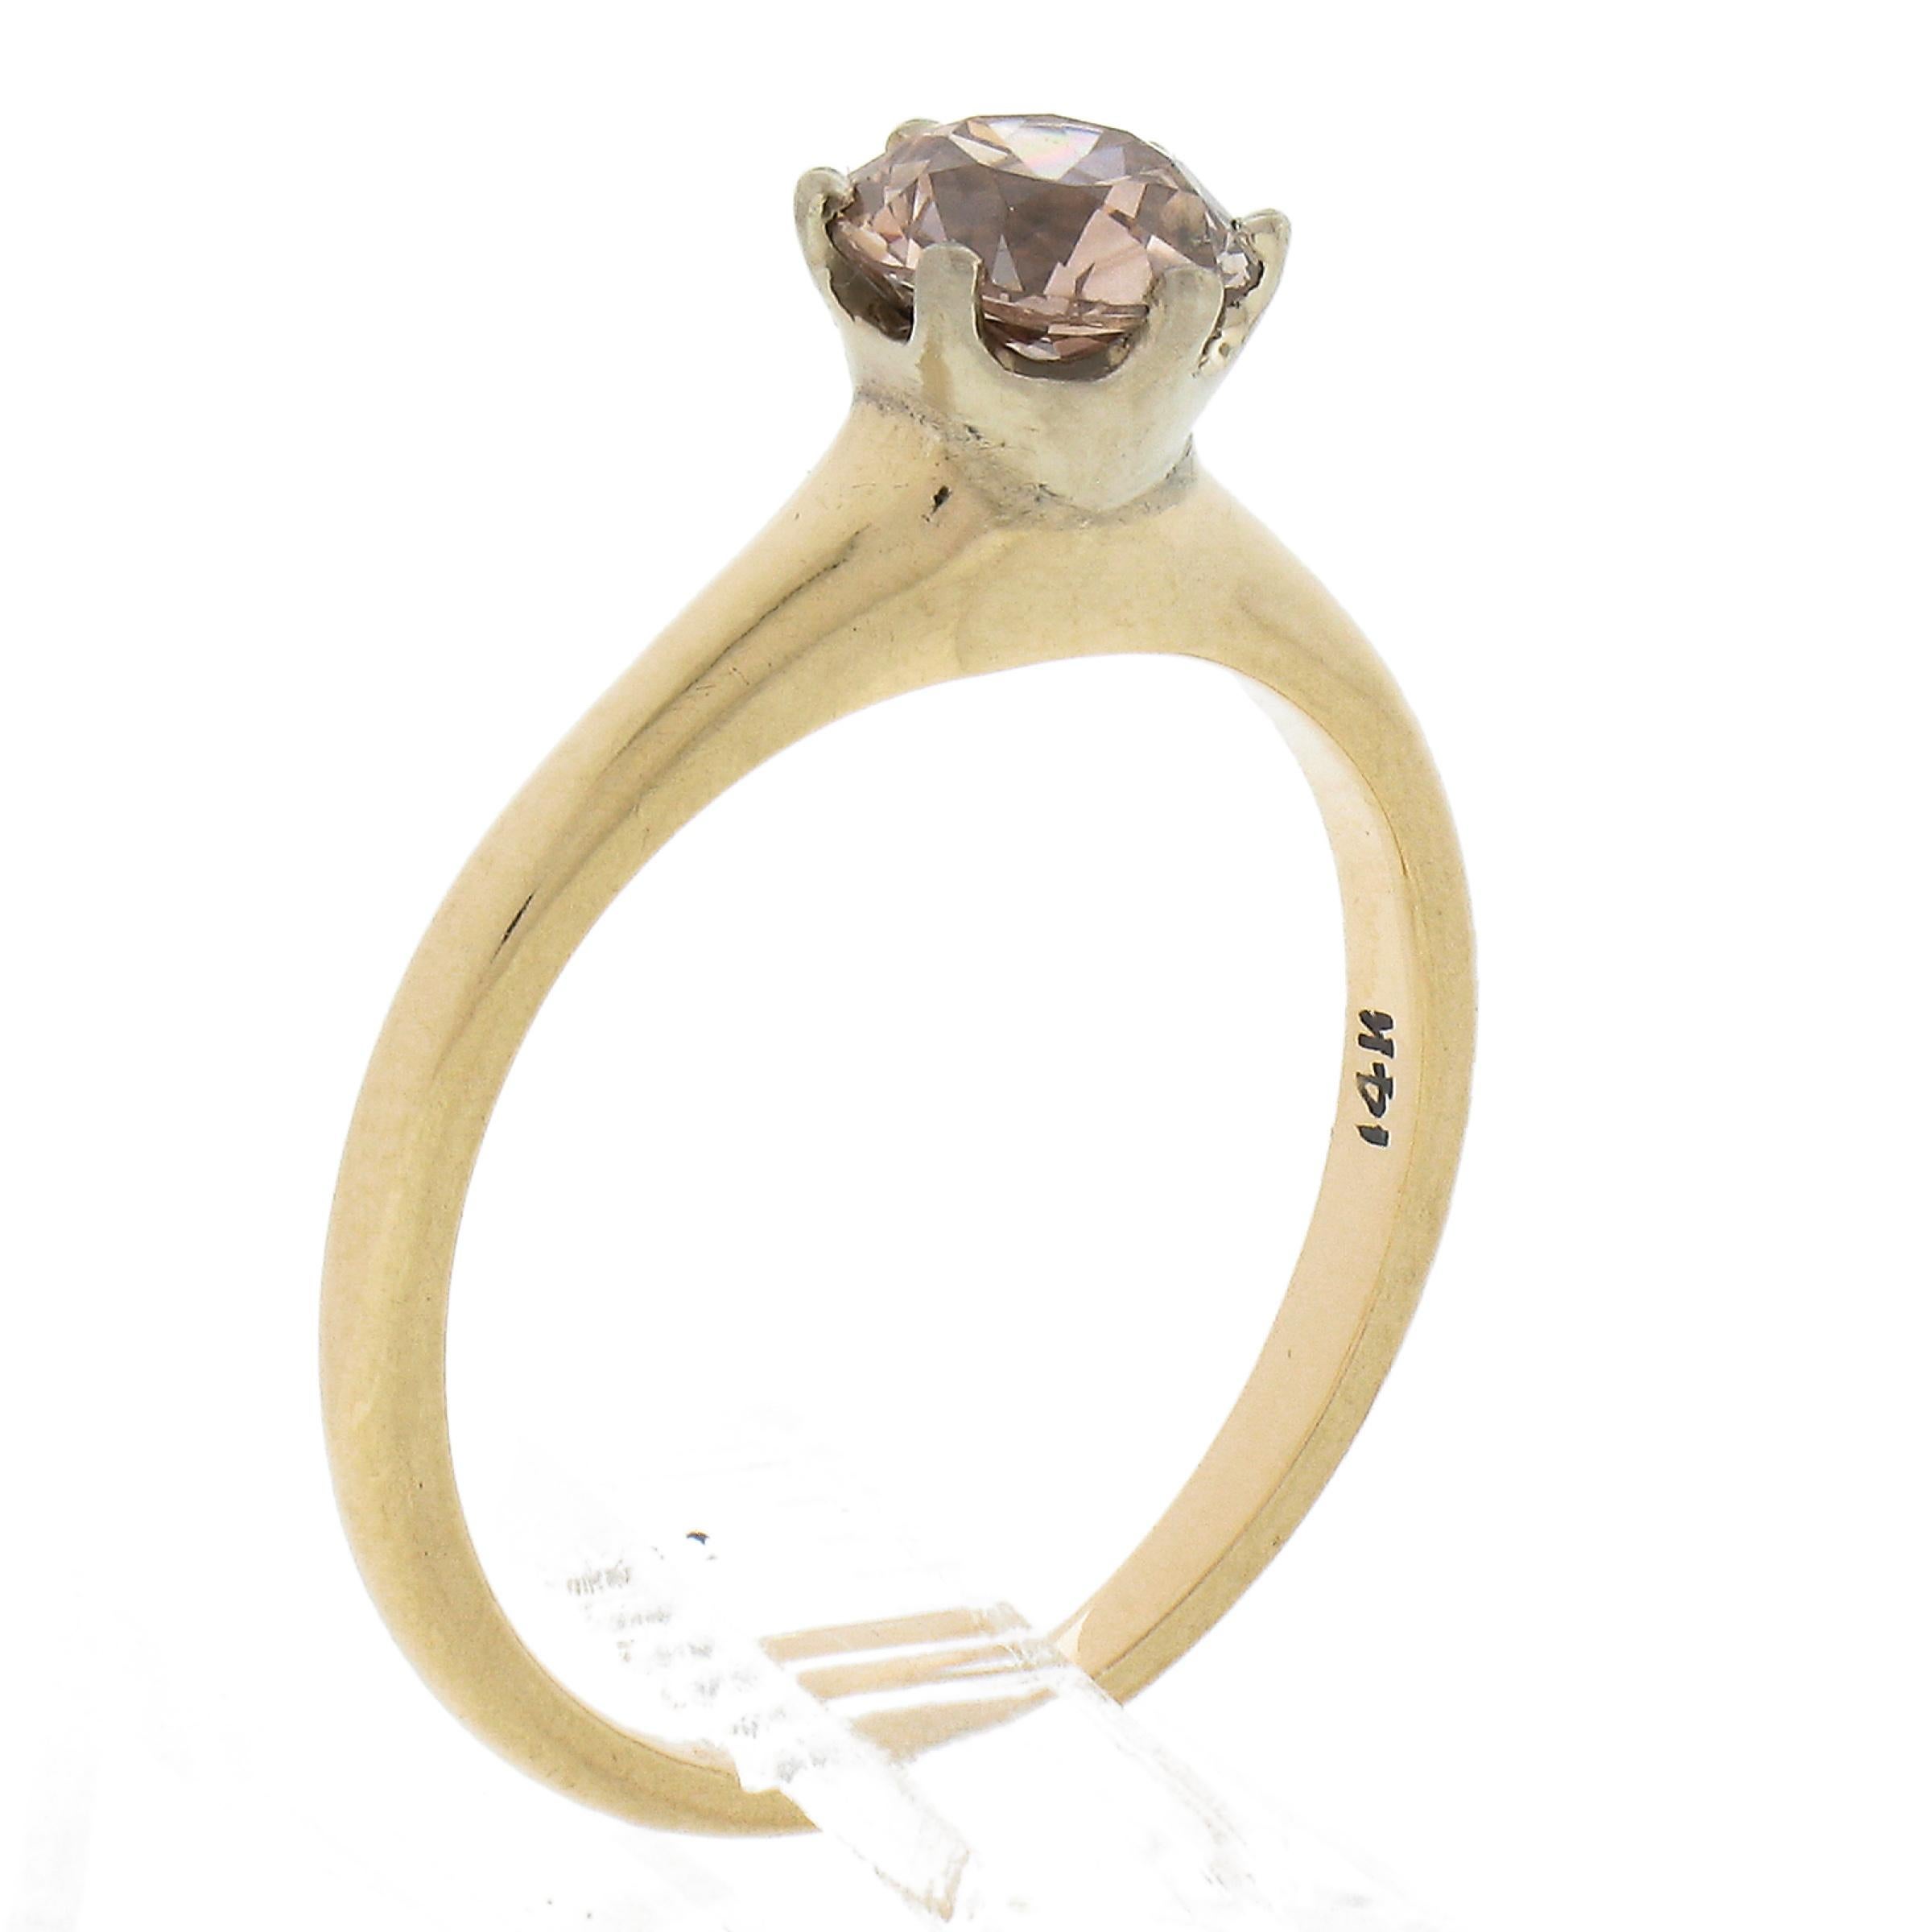 Antique 14k TT Gold .80ct GIA Old Cut Pinkish Brown Diamond Engagement Ring For Sale 4